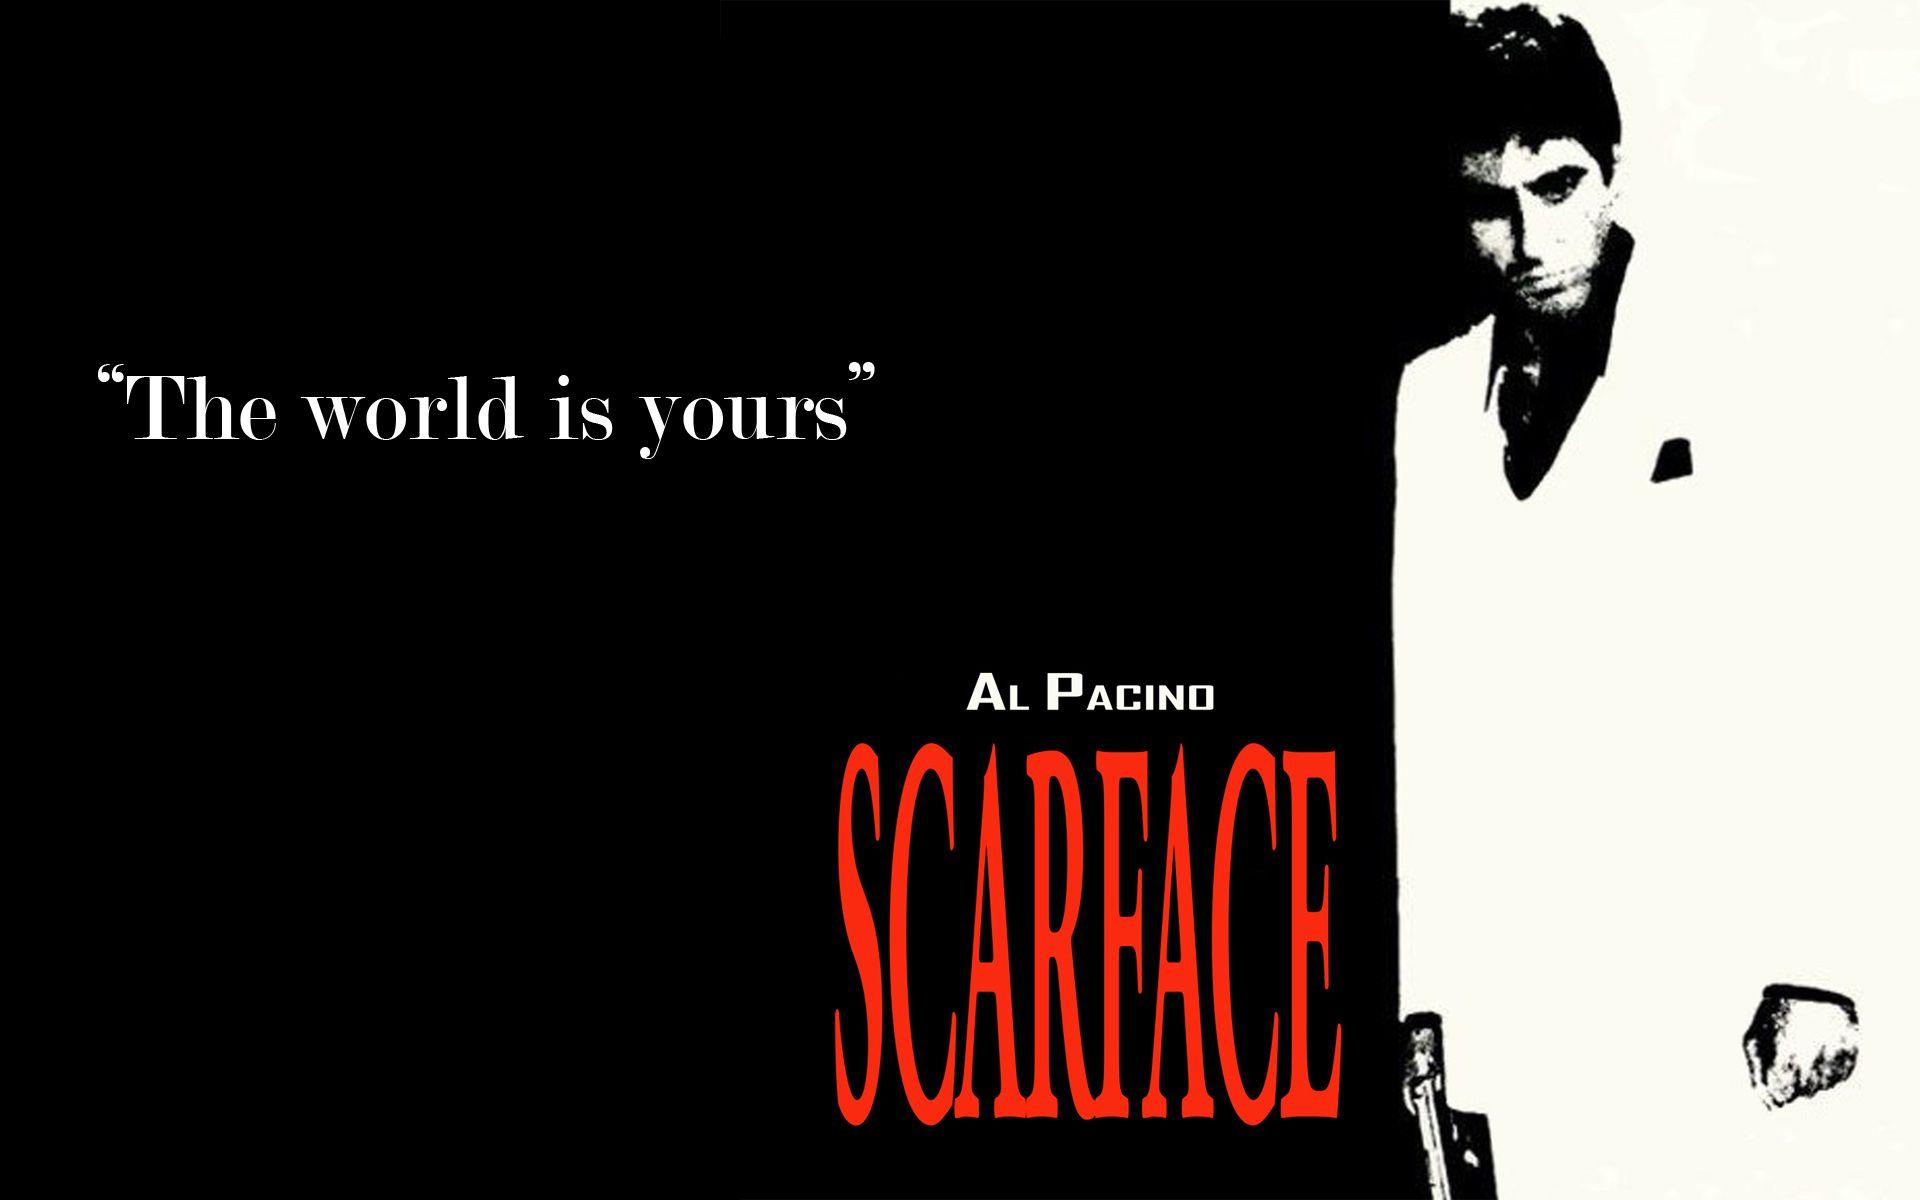 Download Scarface Wallpaper 240x320 #